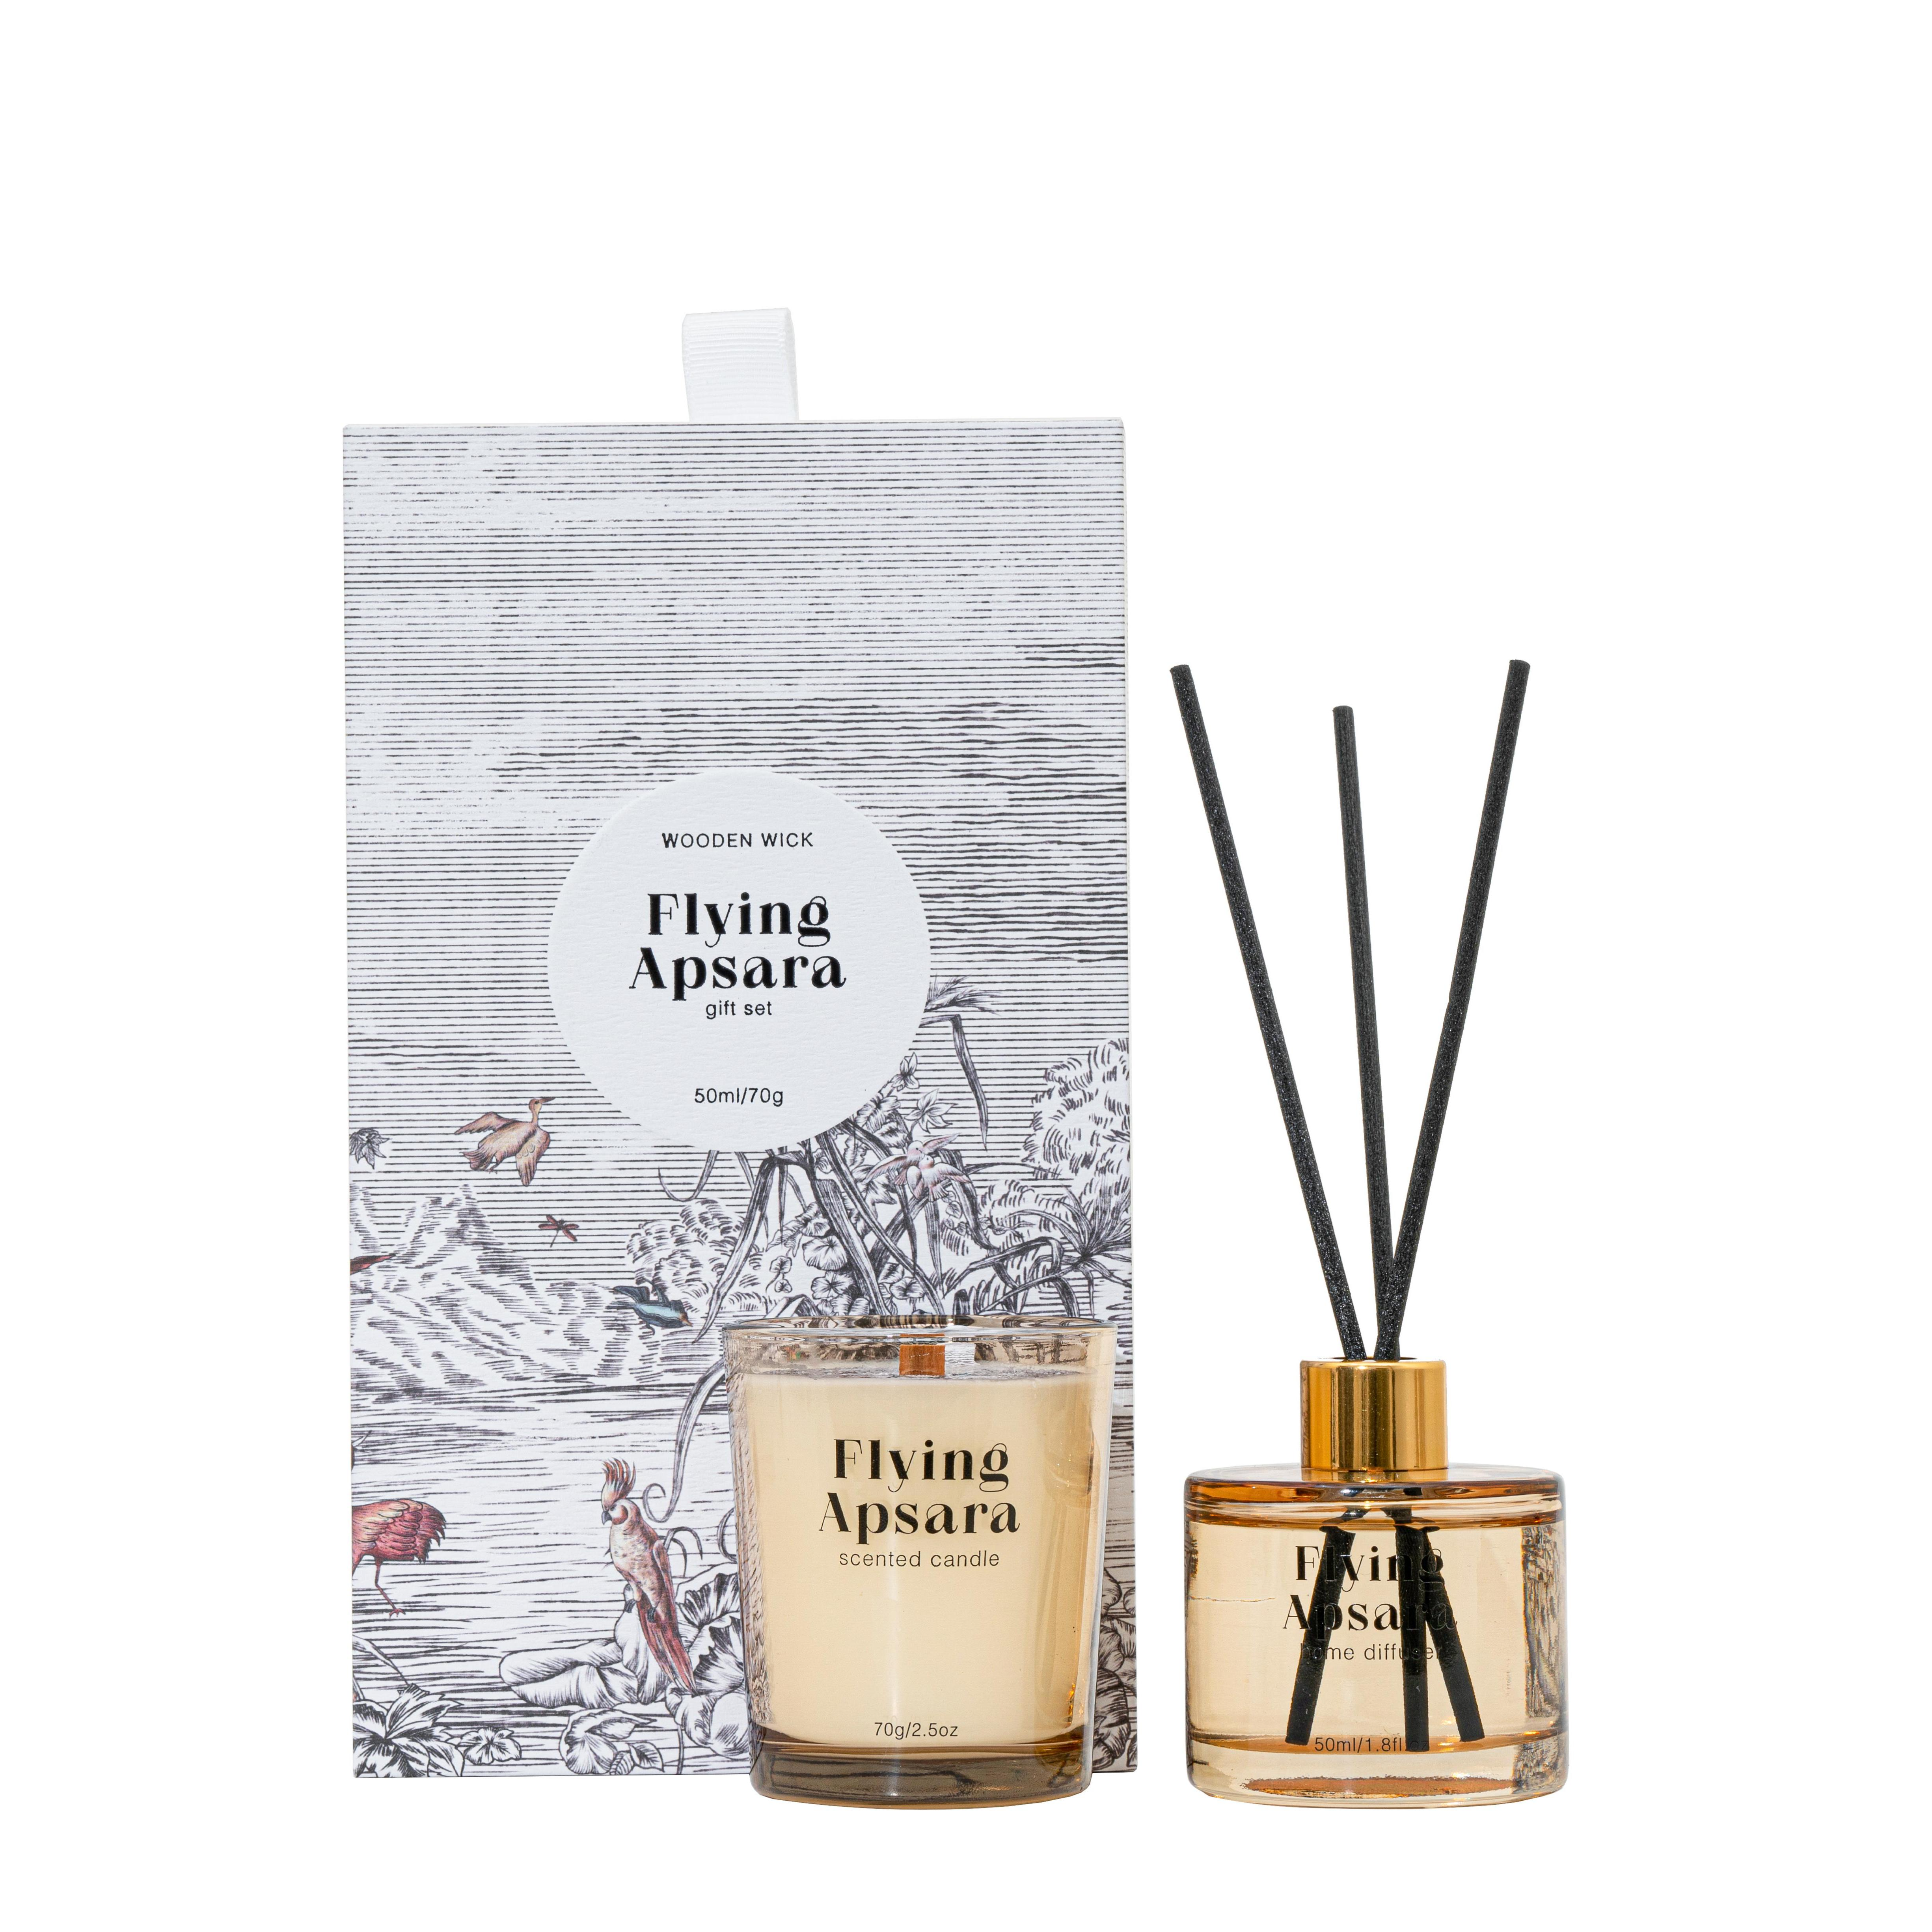 WOODWICK IS ON Collection Flying Apsara 70g/50ml Yellow Scented Candle And Yellow Reed Diffuser